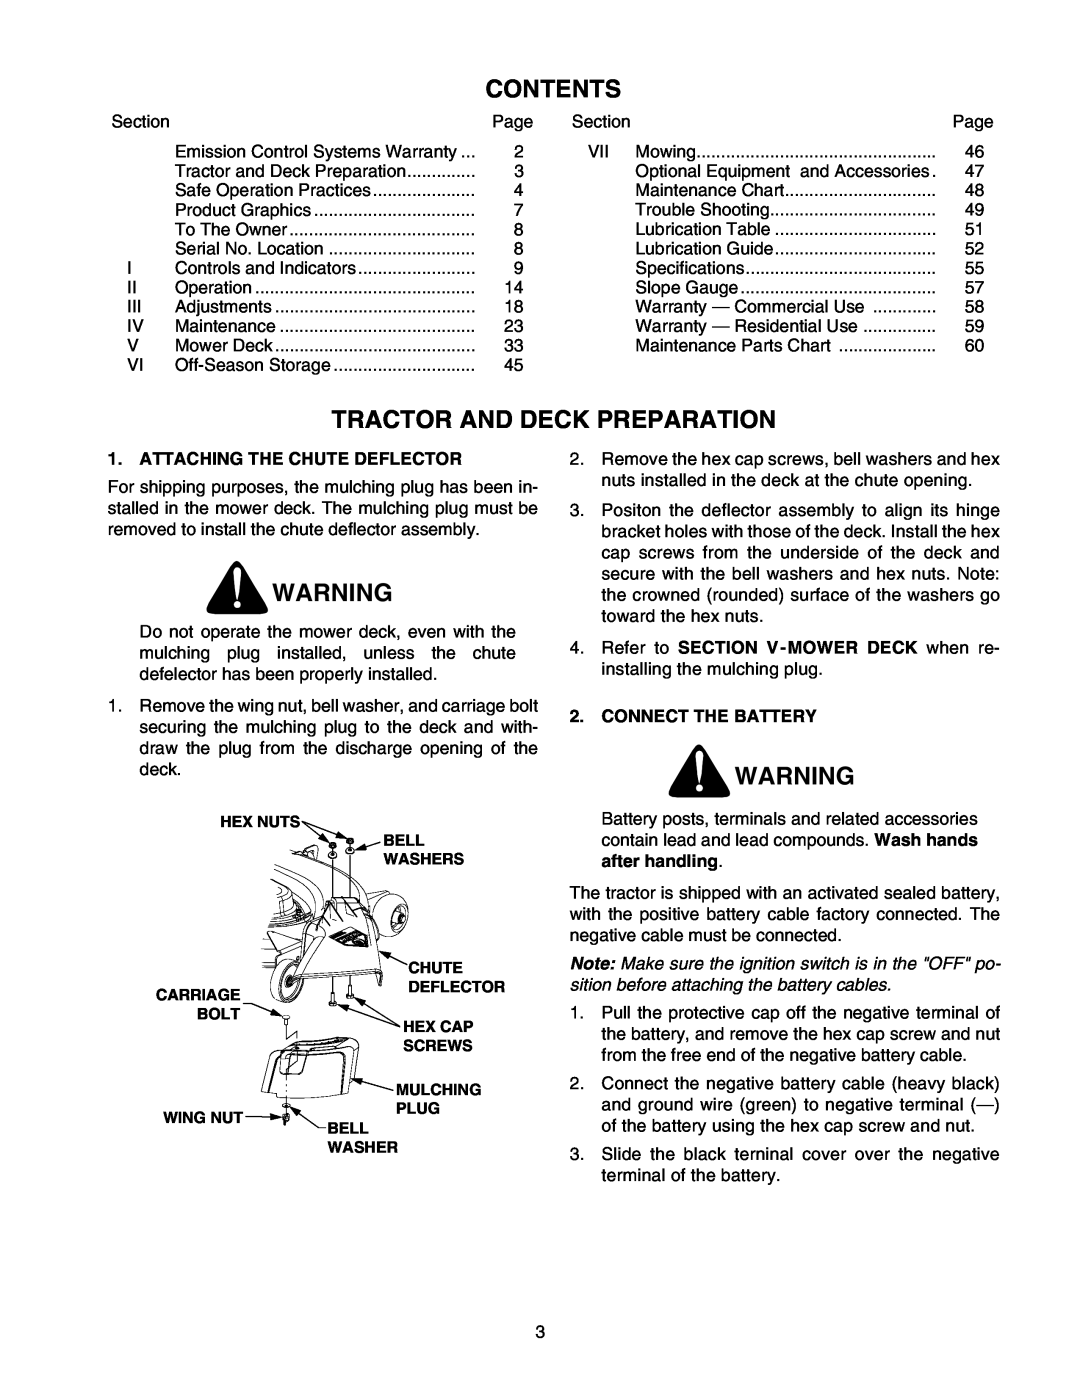 Cub Cadet 2176 manual Contents, Tractor And Deck Preparation, Attaching The Chute Deflector, Connect The Battery 